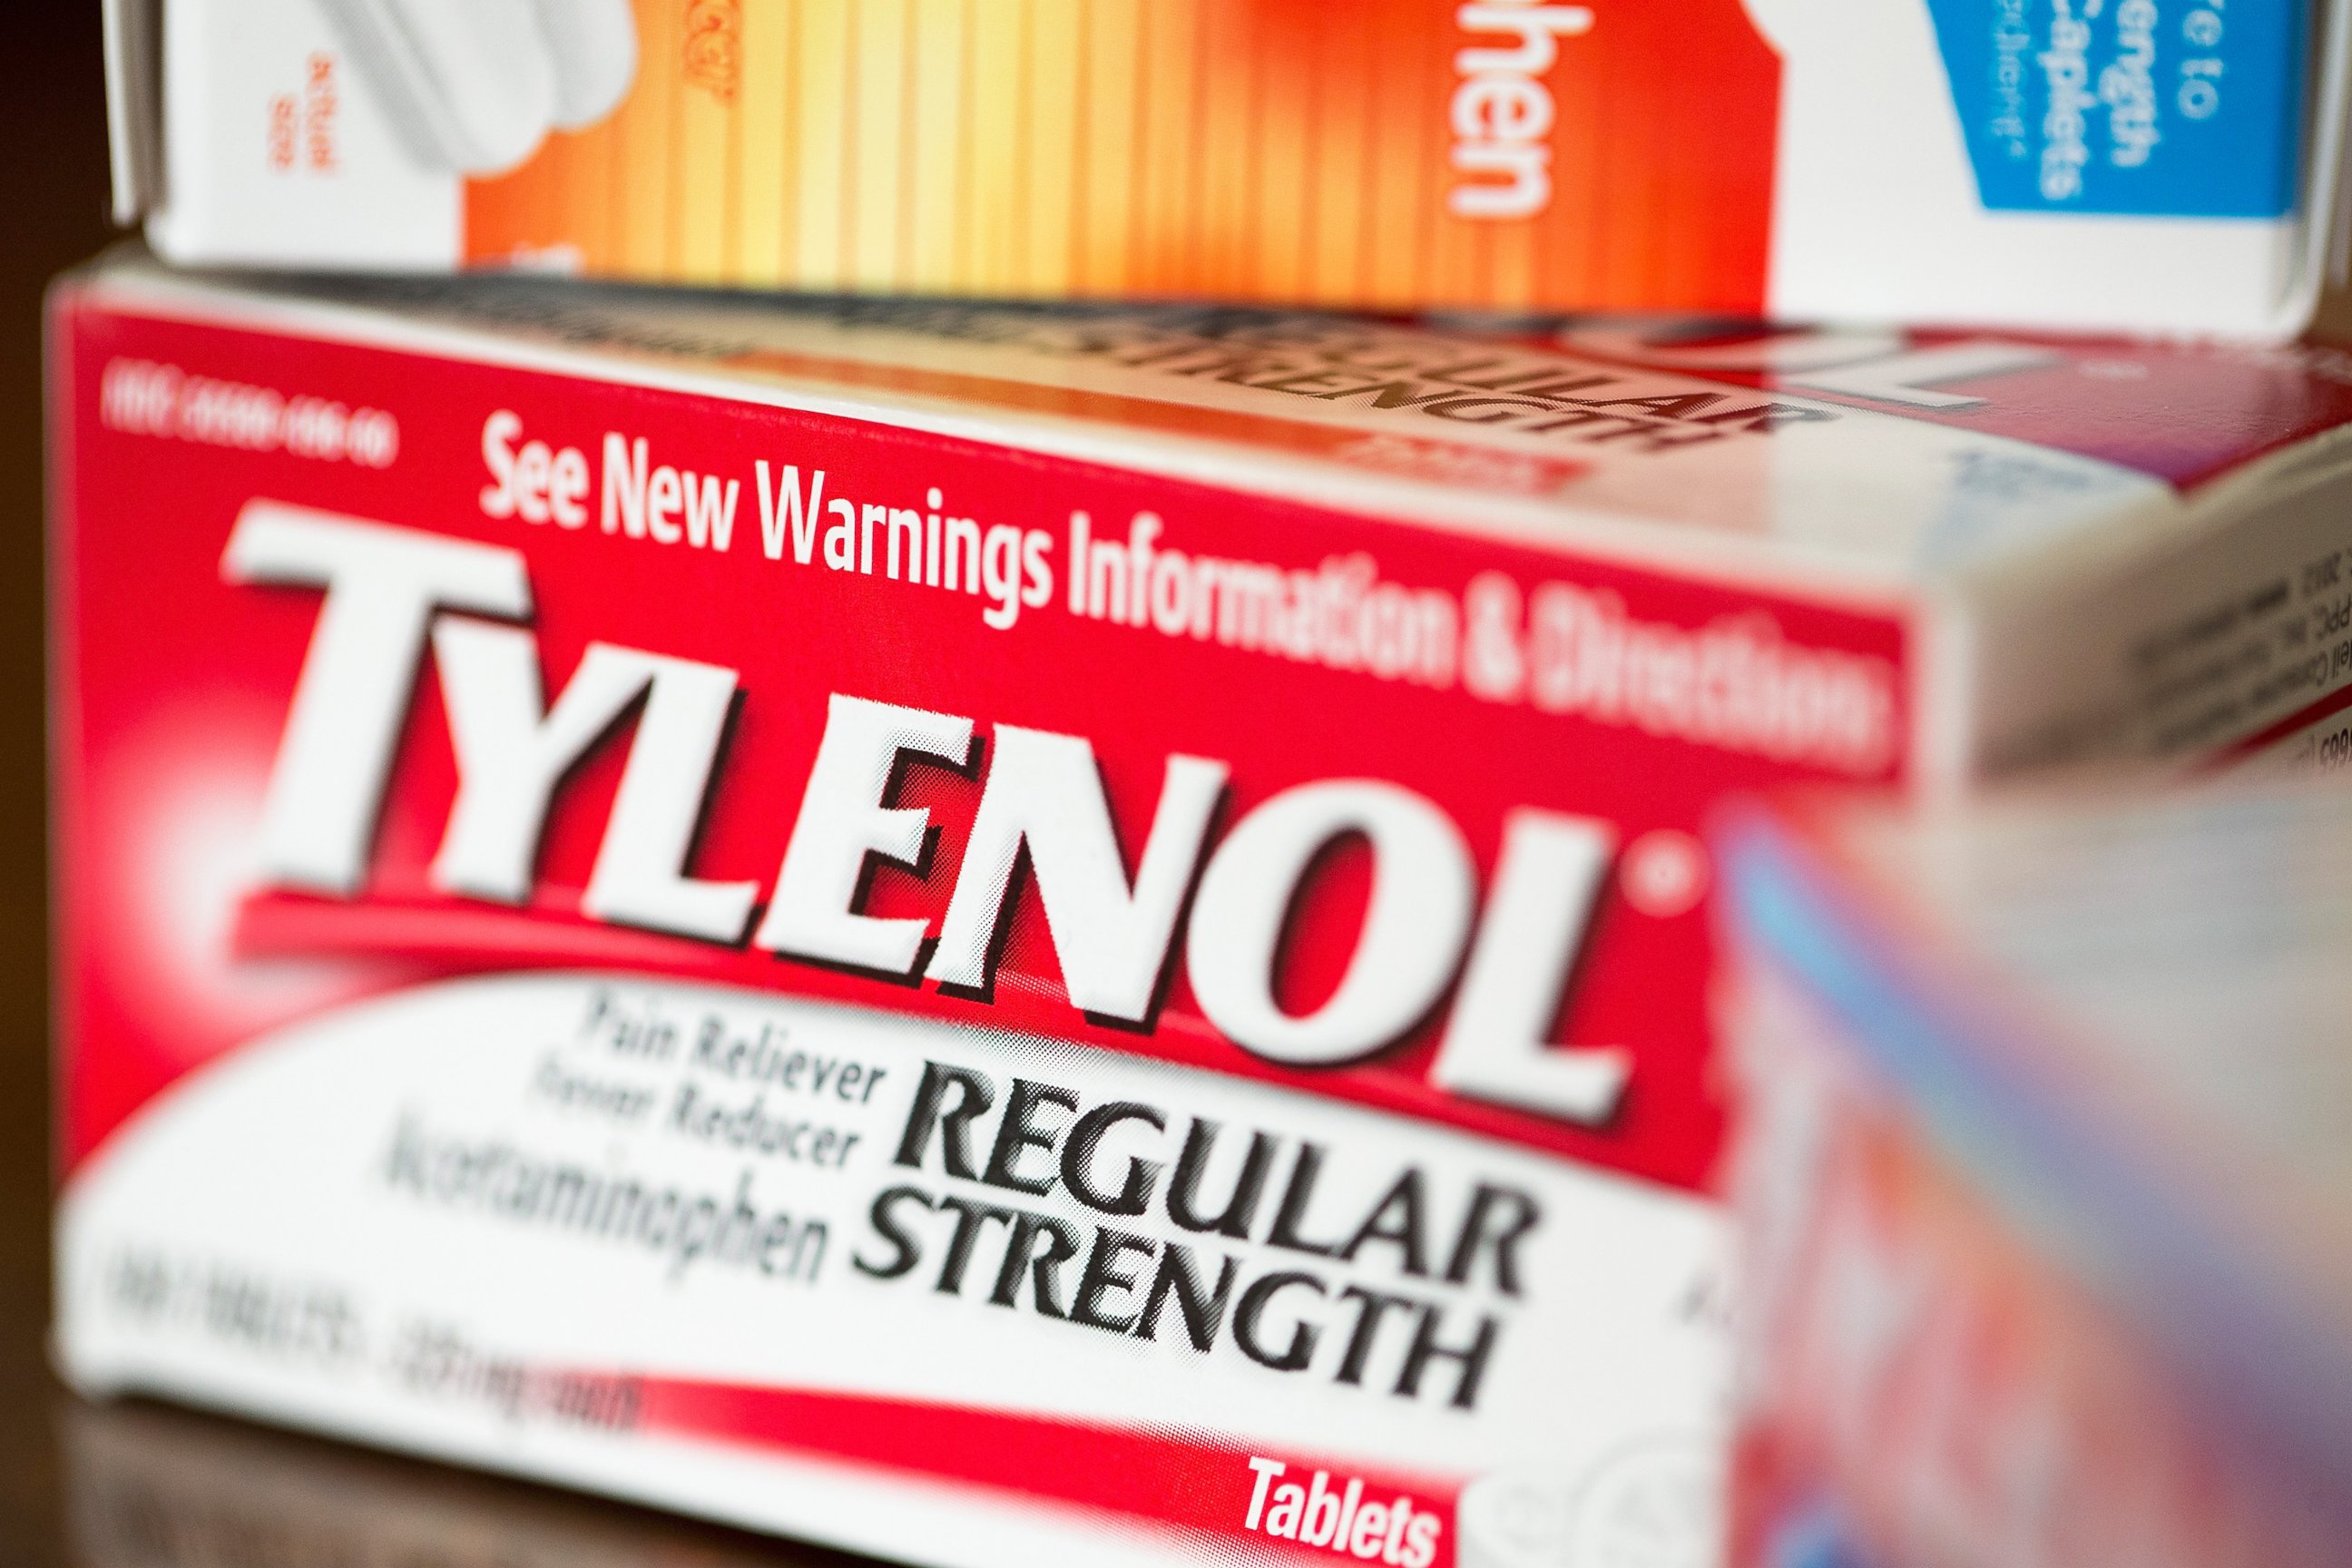 PHOTO: Tylenol is pictured on April 14, 2015 in Chicago.